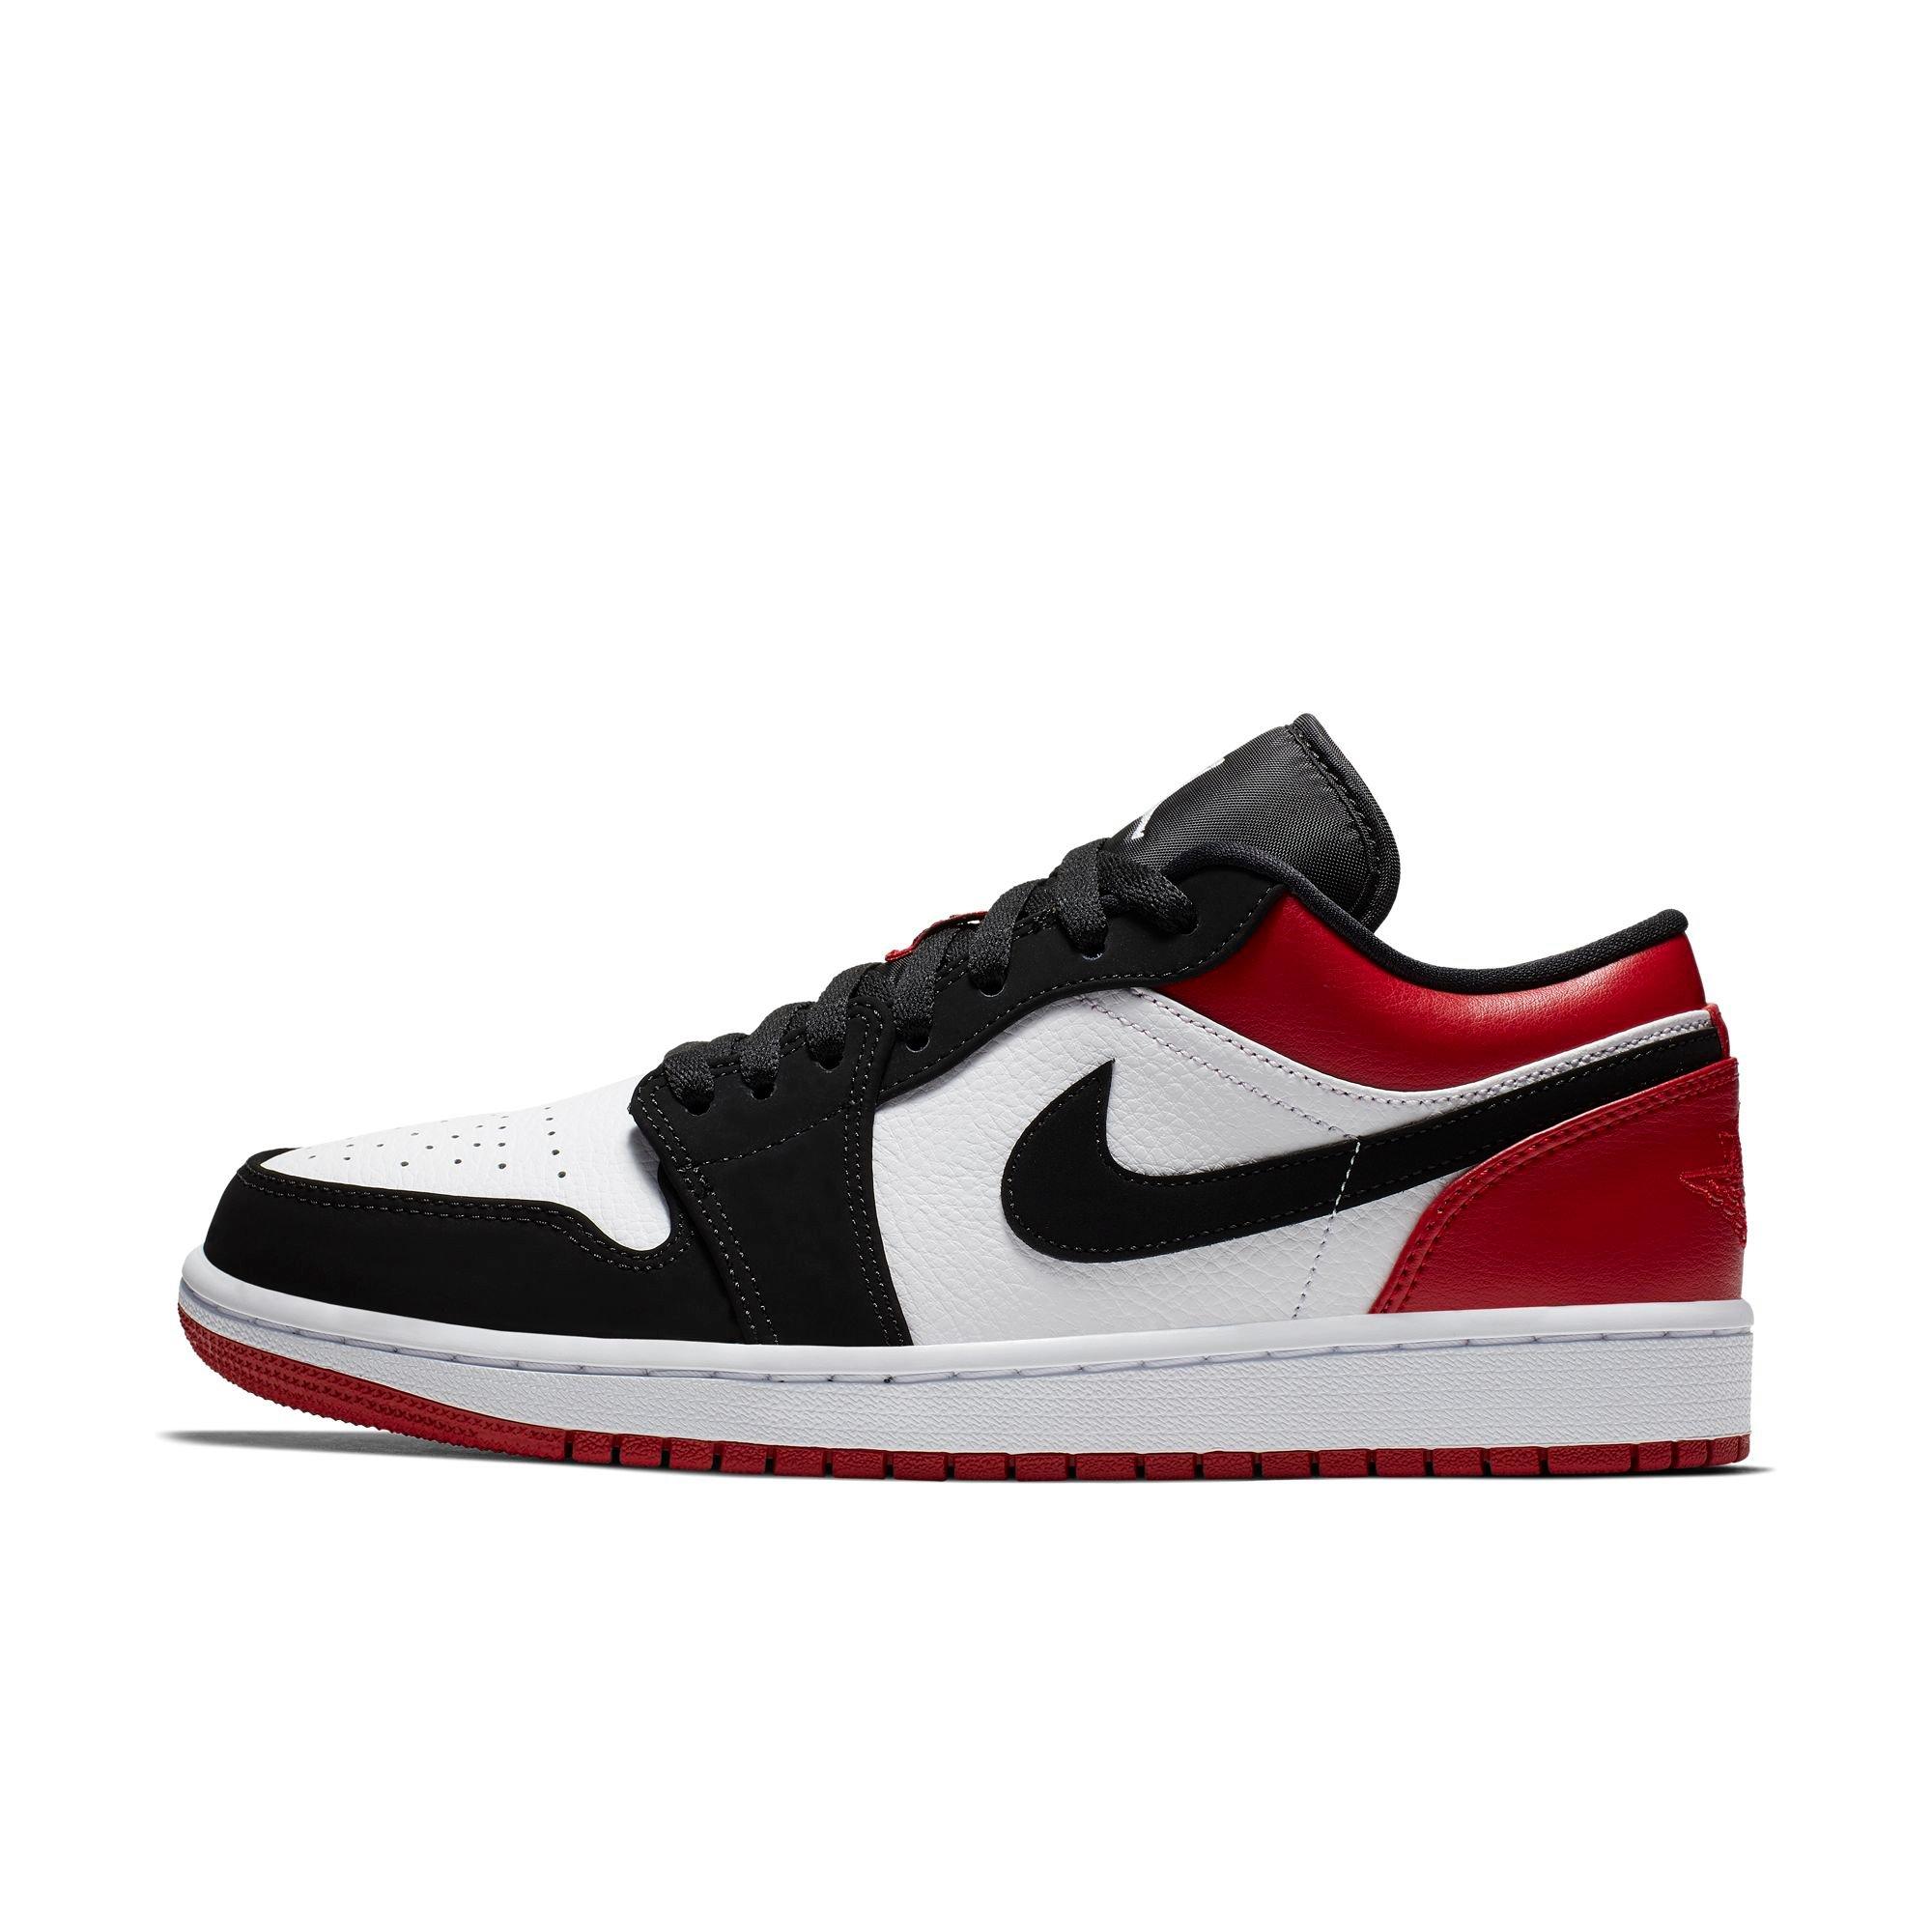 red white and black jordans low top